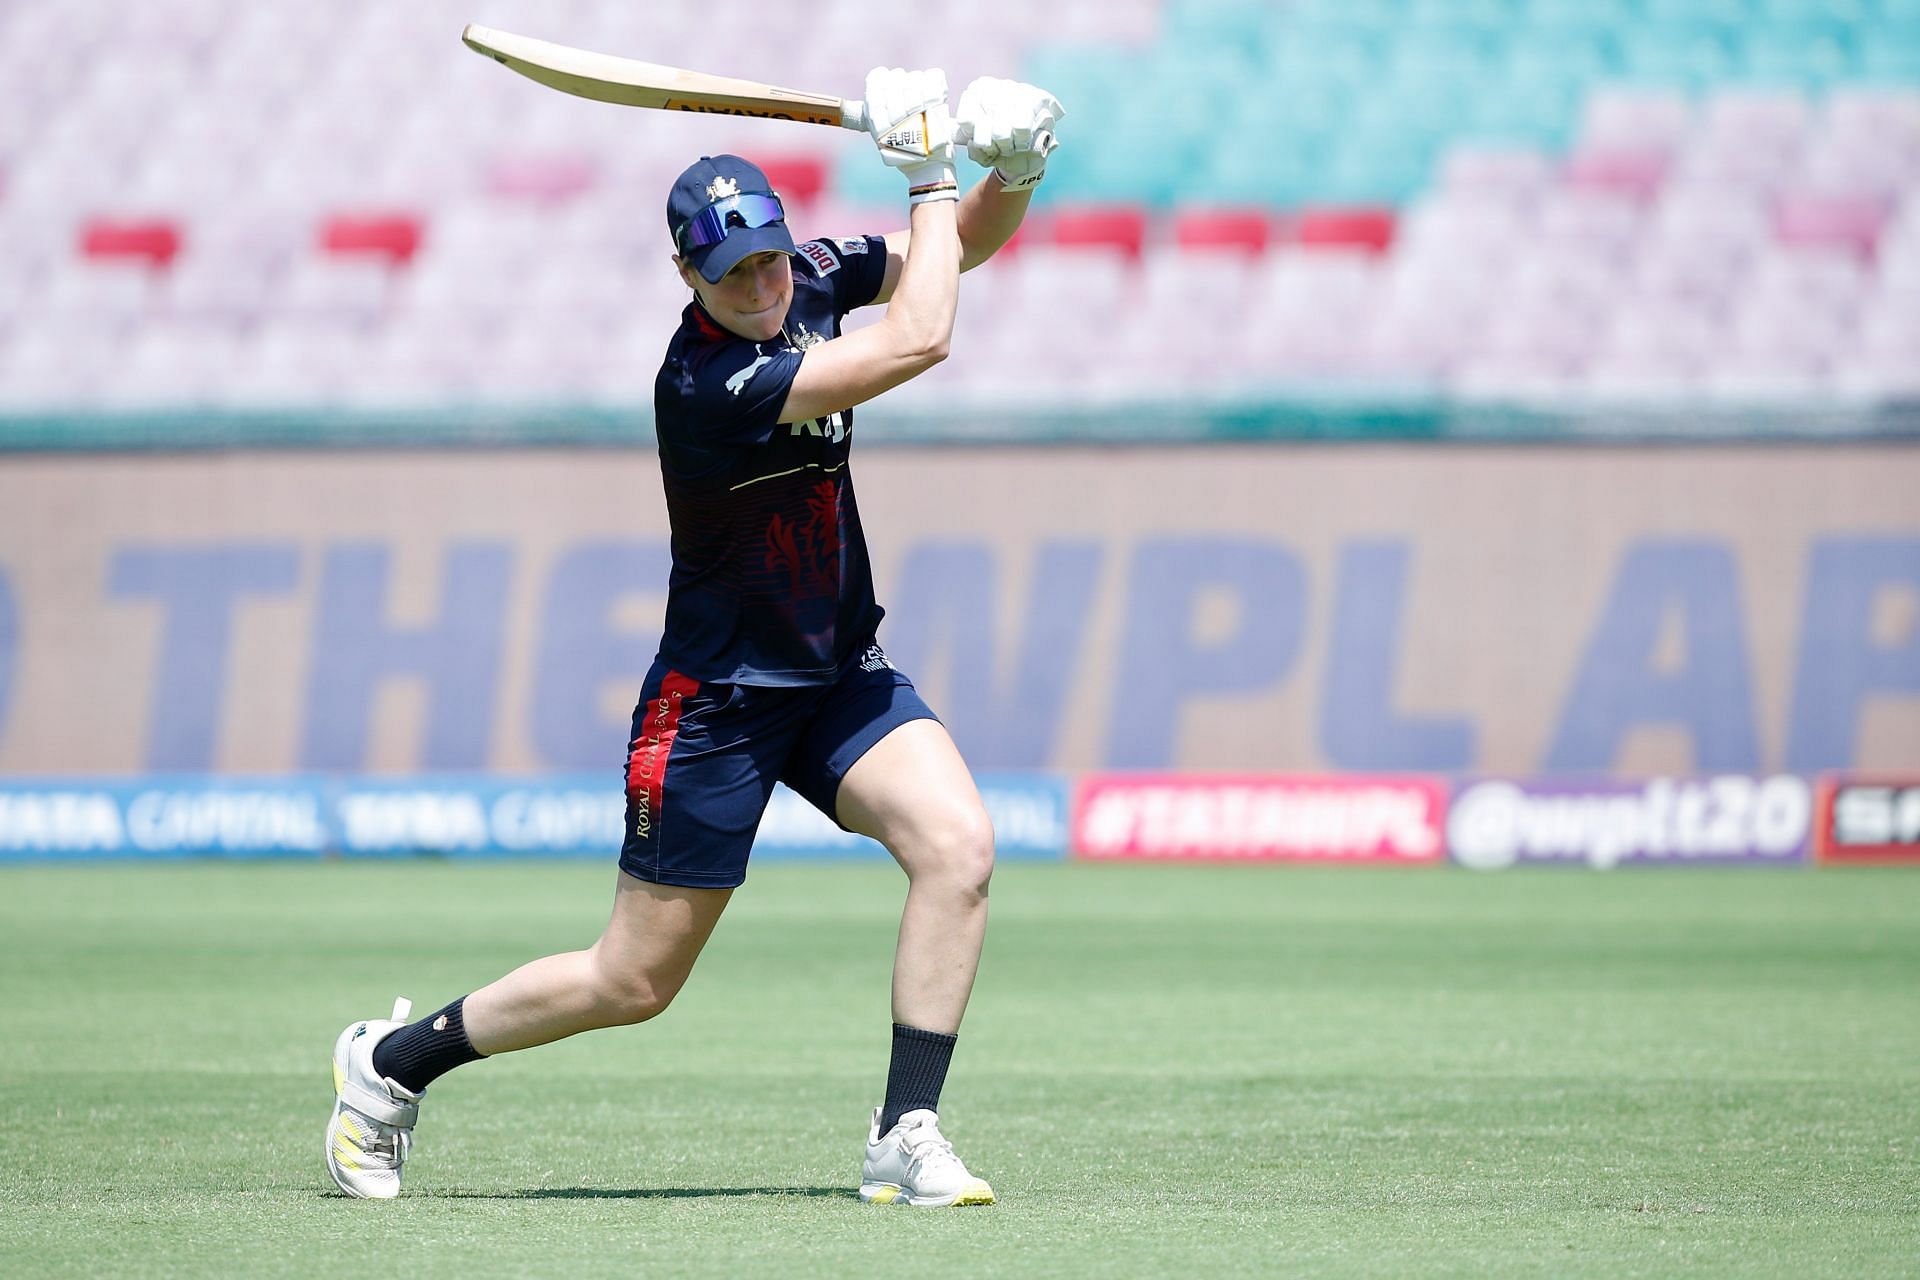 Ellyse Perry can be the game-changer tonight (Image: WPL/X)